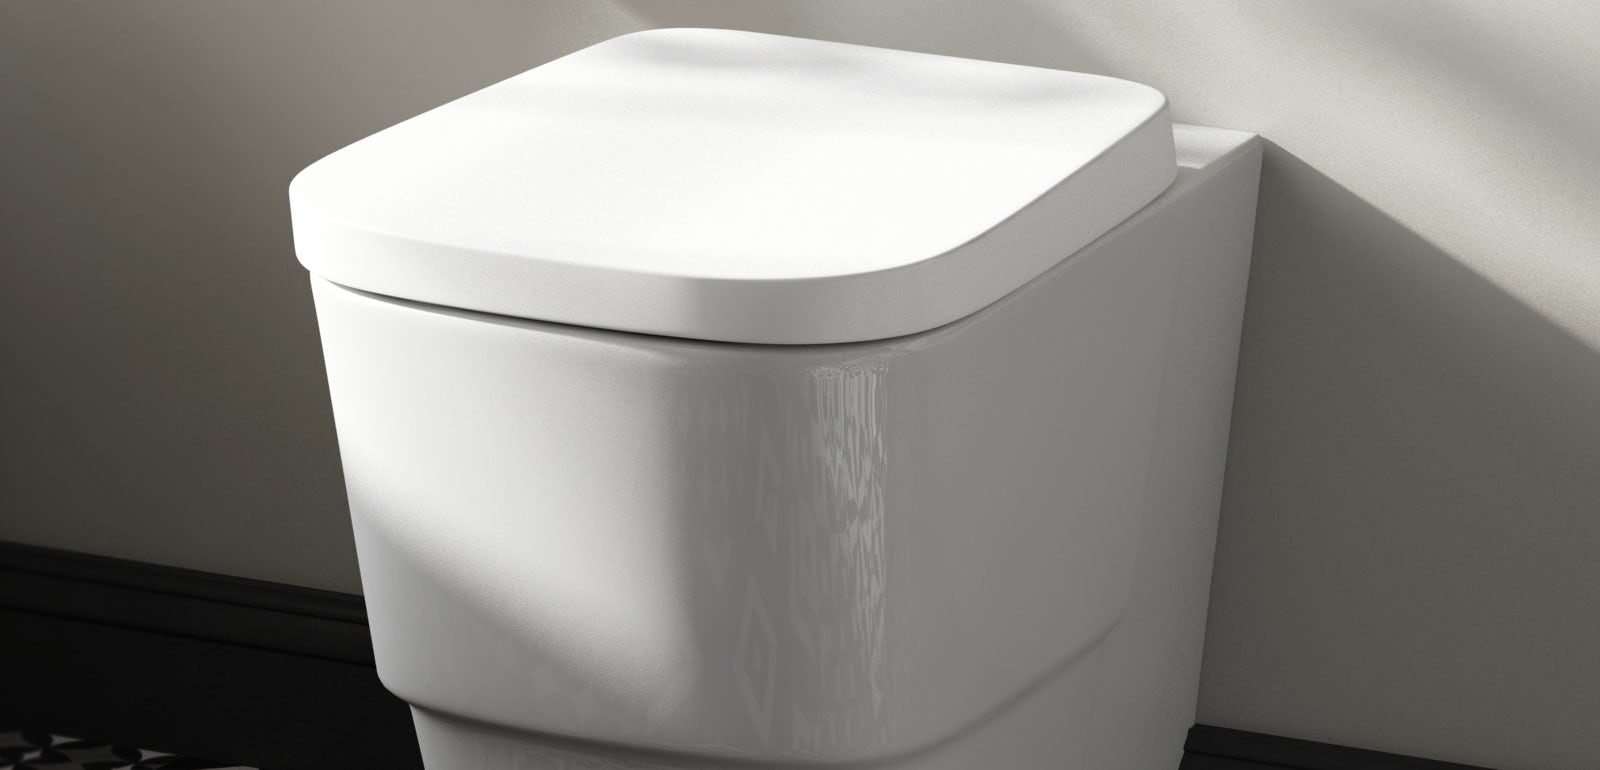 Back to wall toilets guide | VictoriaPlum.com